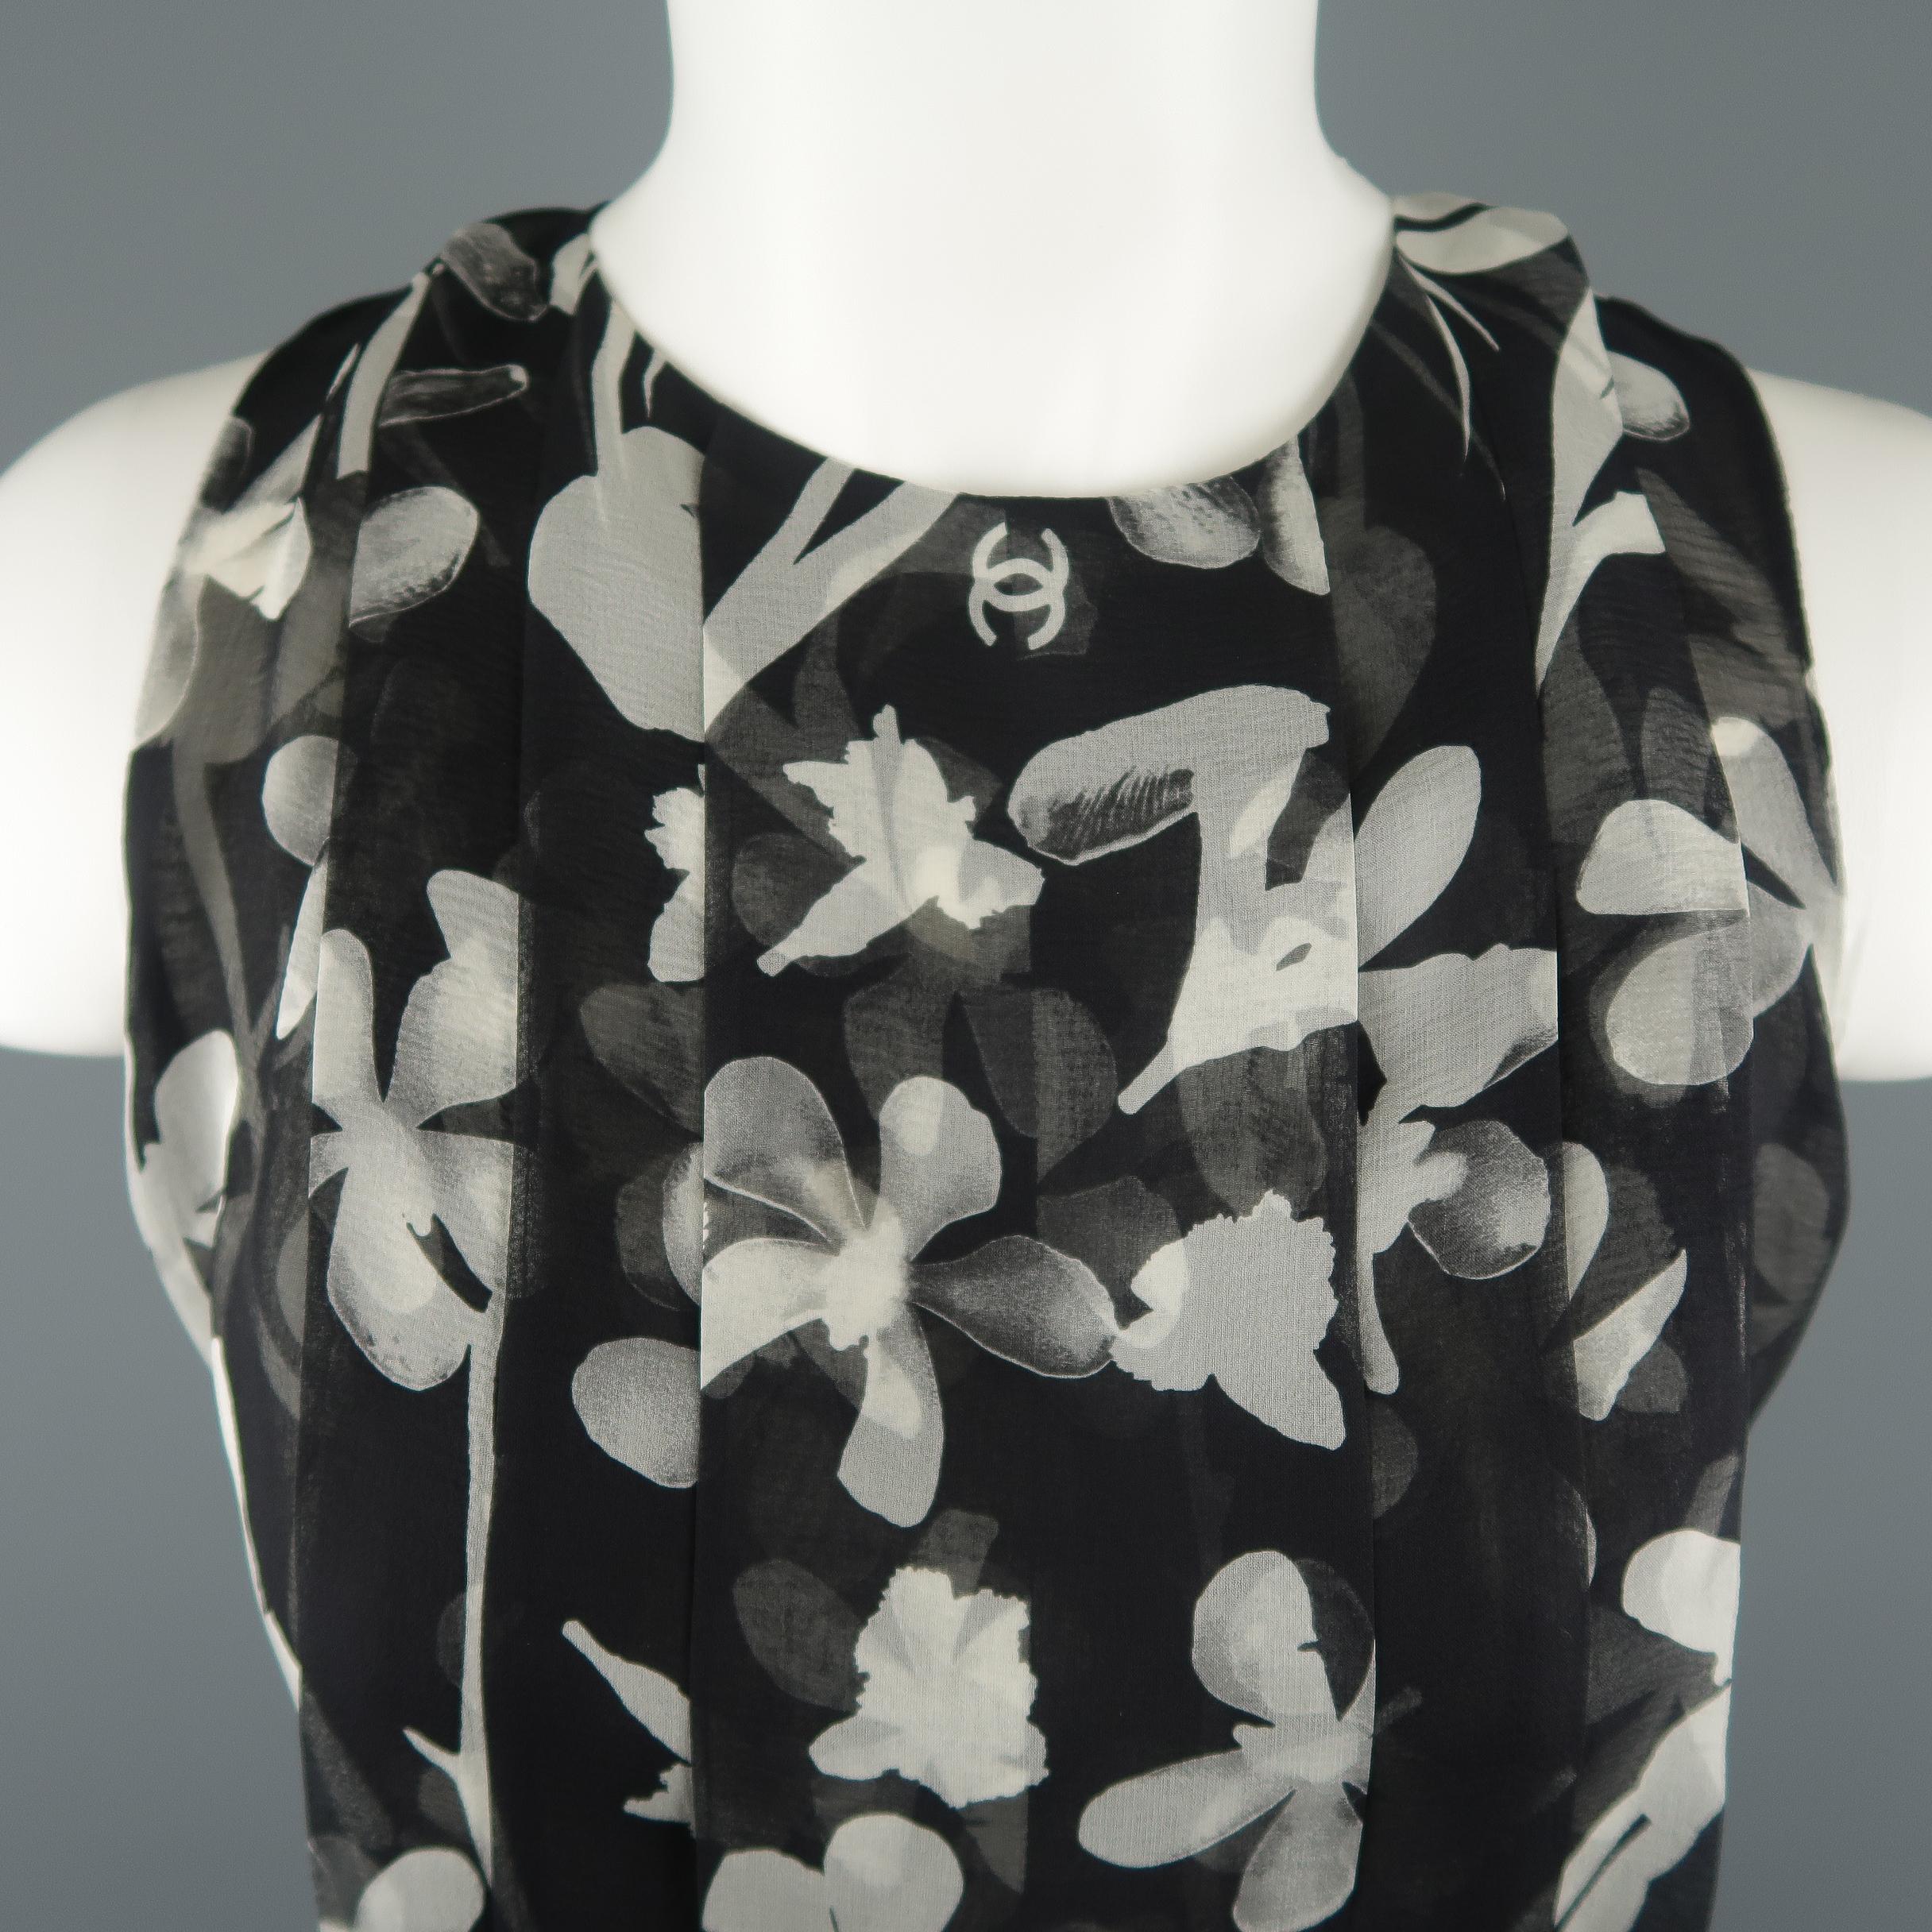 CHANEL sleeveless blouse comes in black and cream floral CC print silk chiffon with a pleated front, round neckline, and button up back. Label cut out. As-is. Made in France.
 
Good Pre-Owned Condition.
Marked: (no size)
 
Measurements:
 
Shoulder: